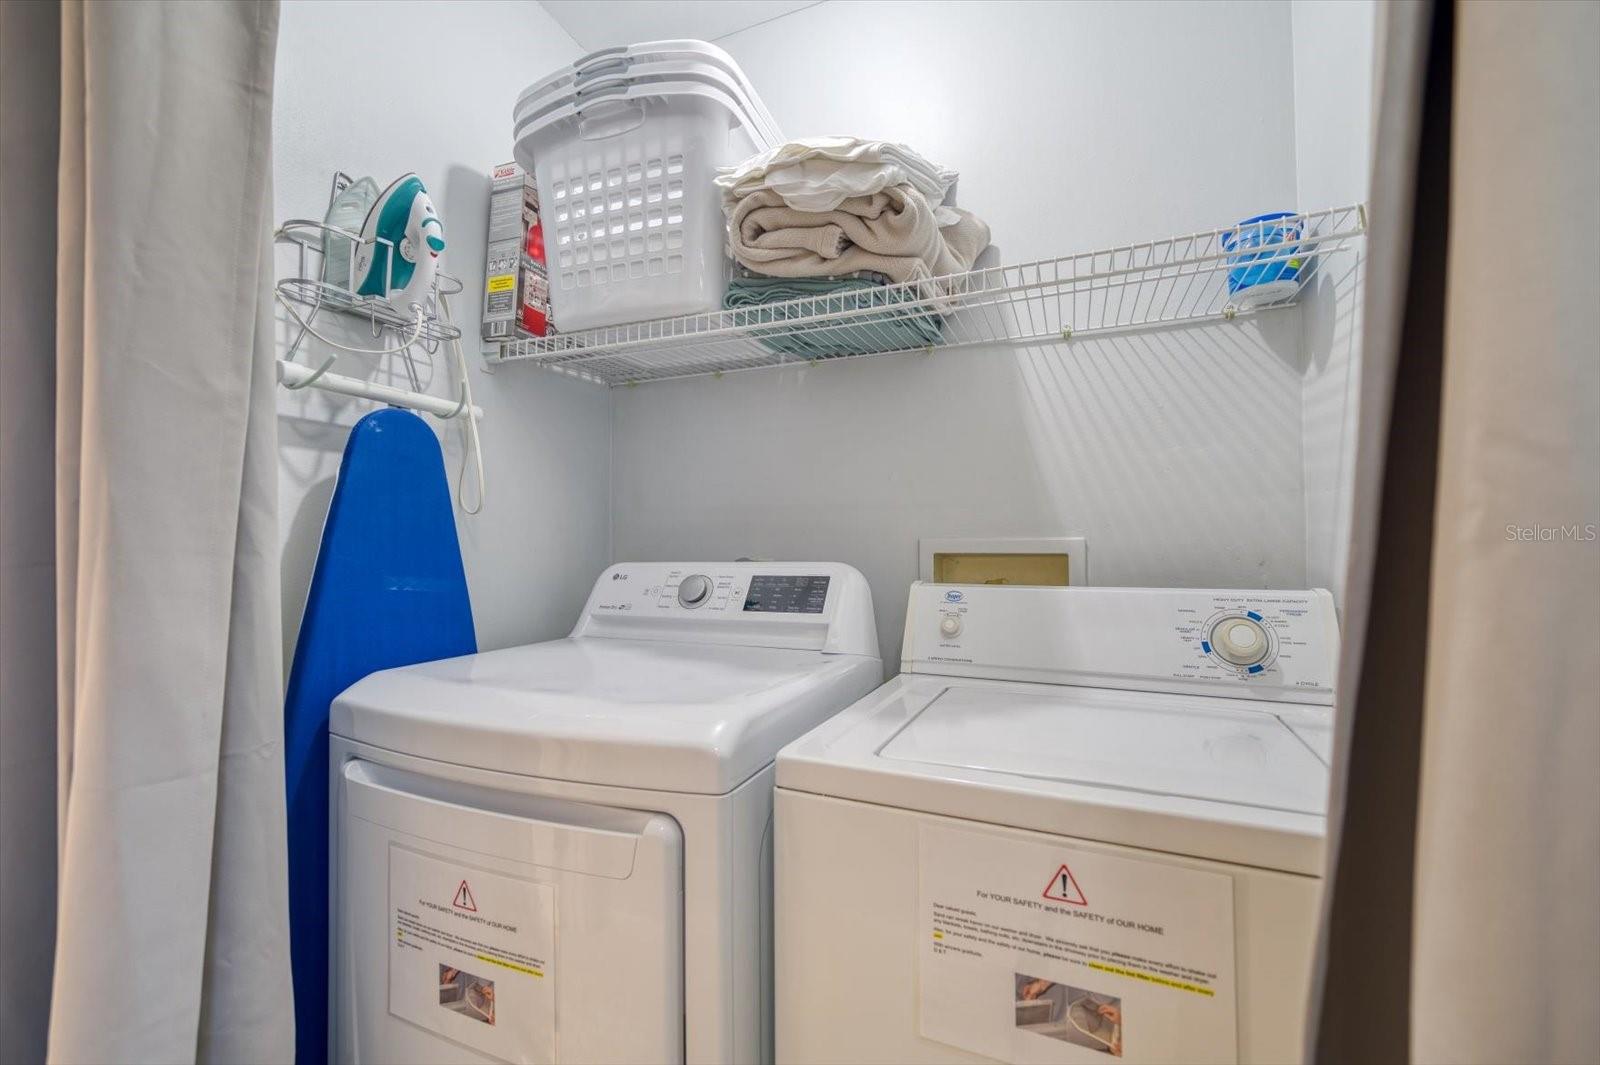 Washer & dryer is located at the top of the 2nd floor landing just outside the primary bedroom